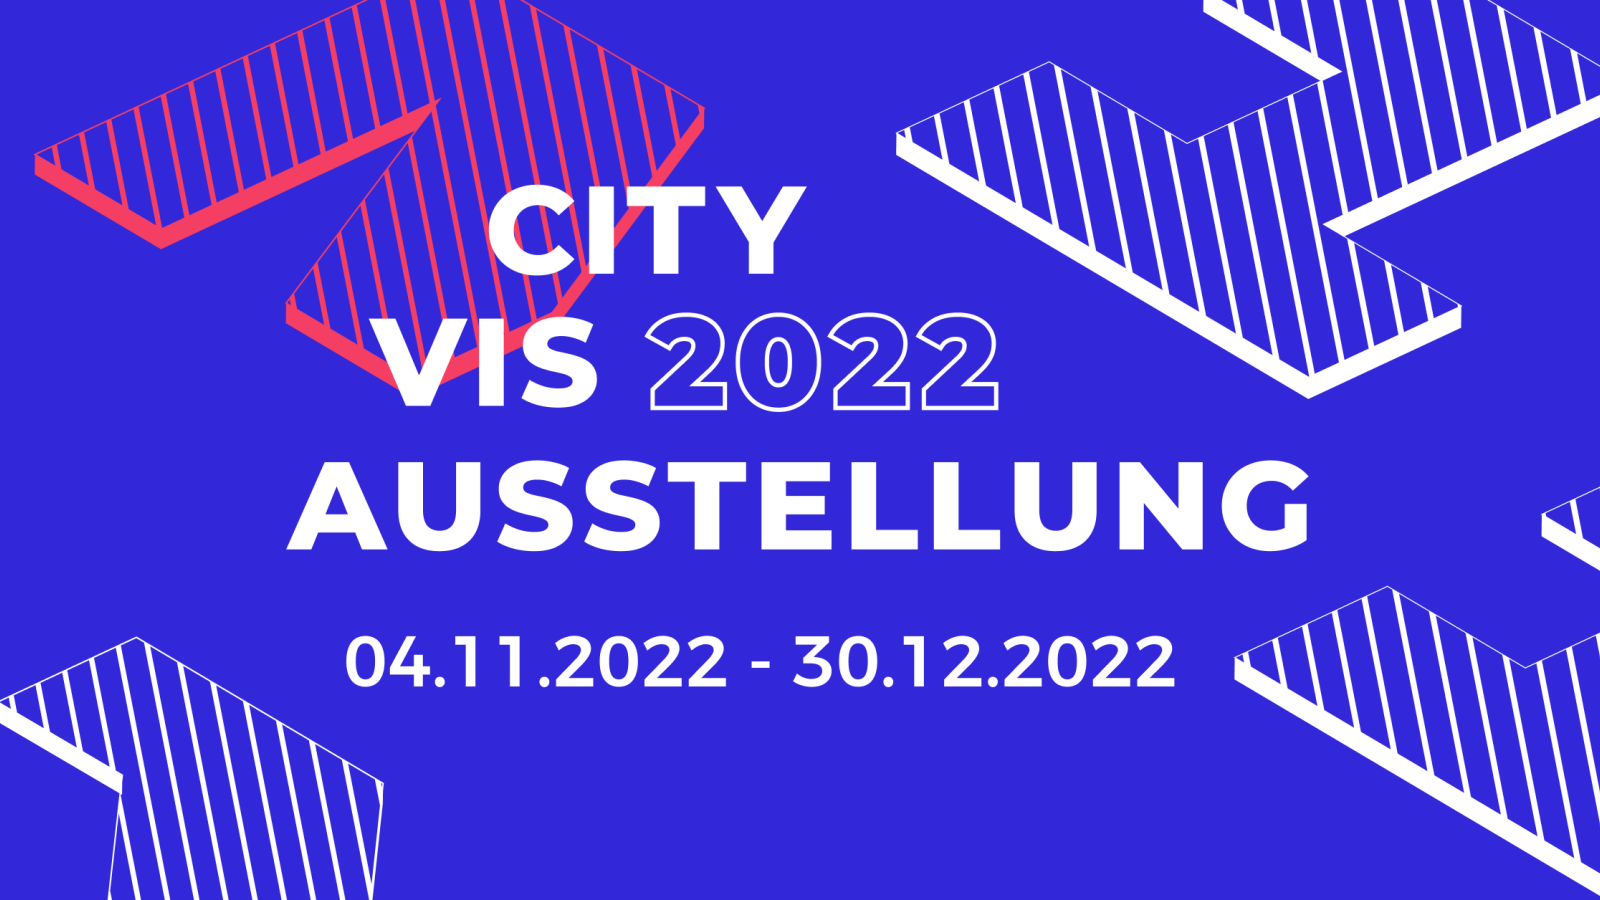 CityVis 2022 Ausstellung: Beyond the Smart City – Reflections on the digital City